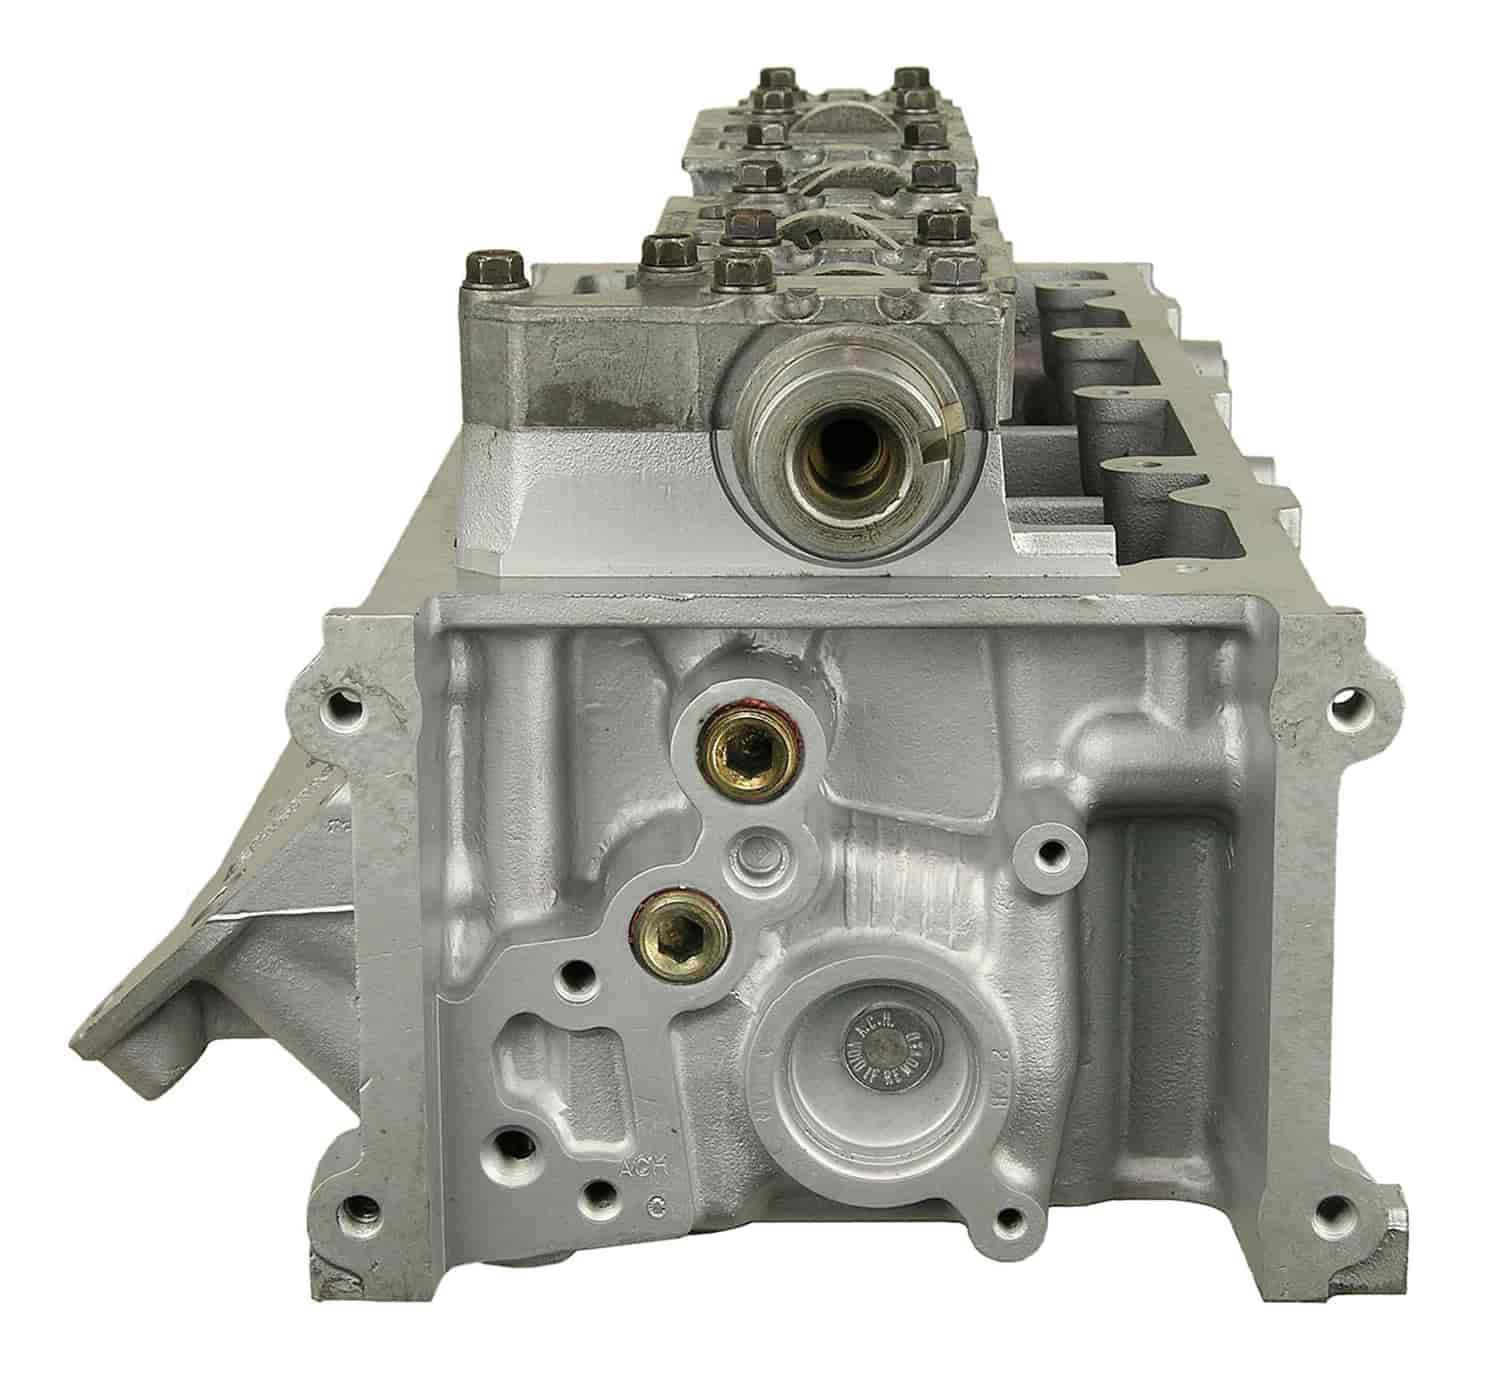 Remanufactured Cylinder Head for 1994-1995 Ford/Mercury with 4.6L